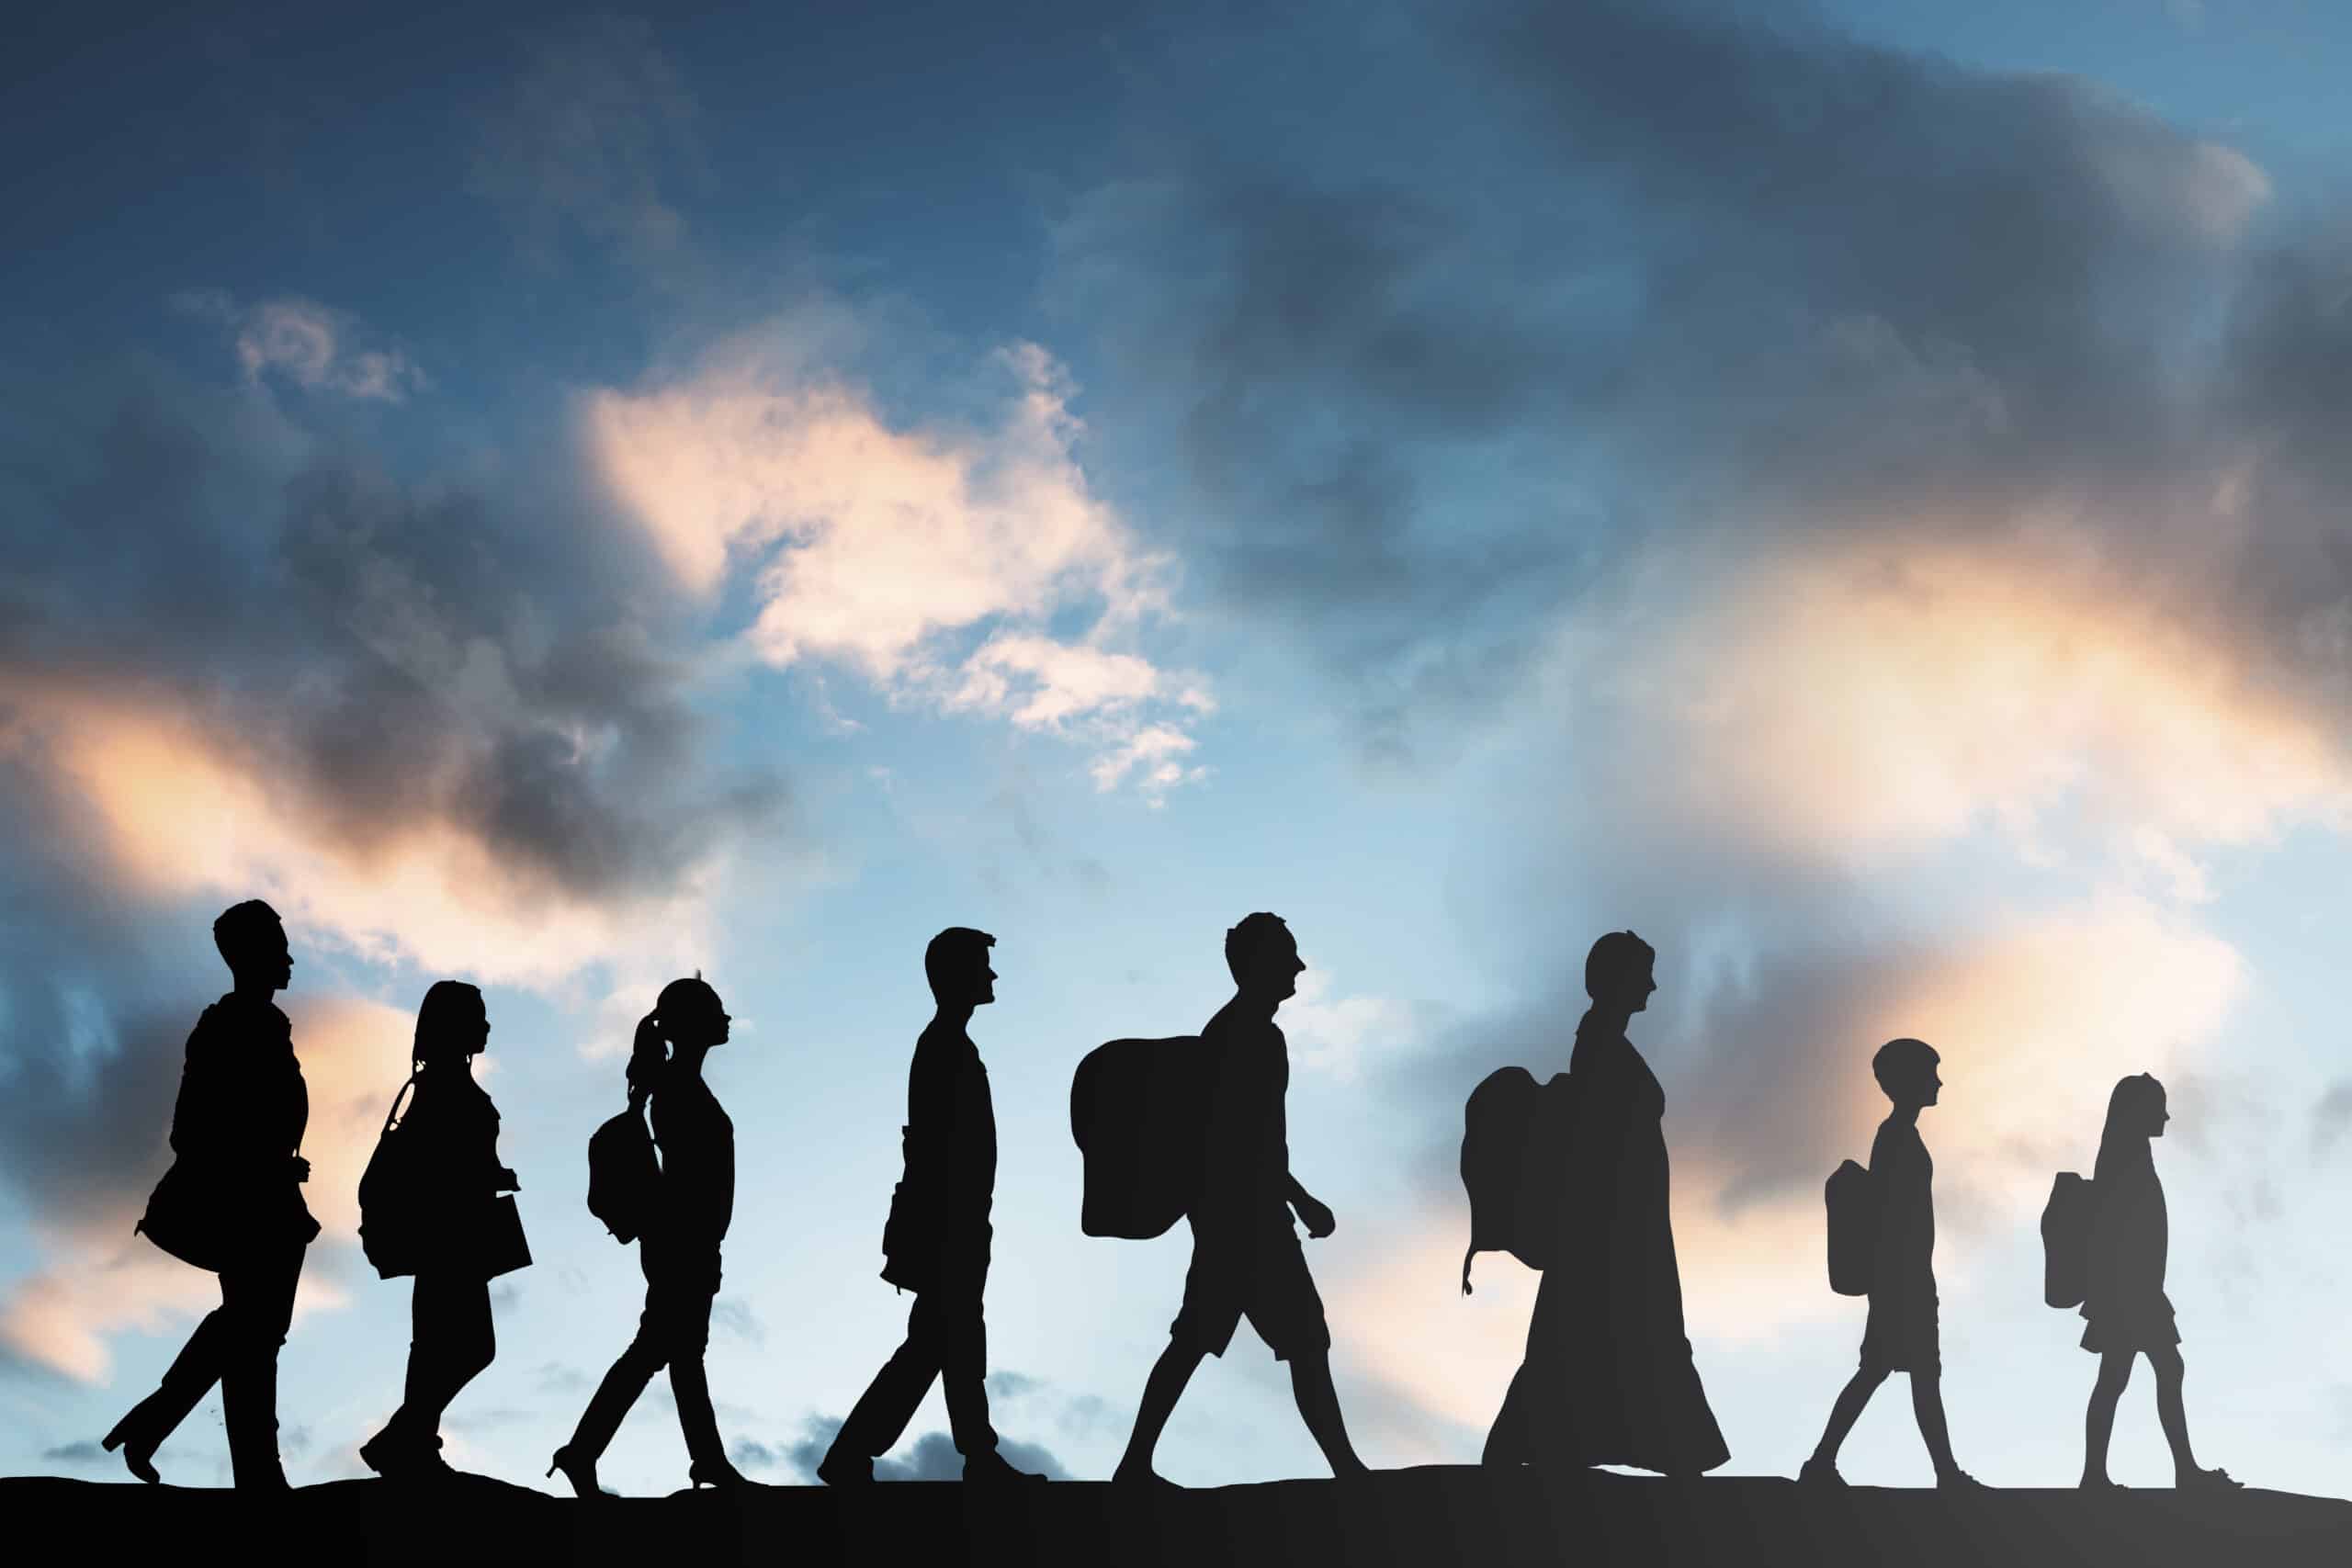 A group of silhouetted figures walks across the ground. The sky is blue and there are dark clouds. Some of the figures are carrying suitcases.